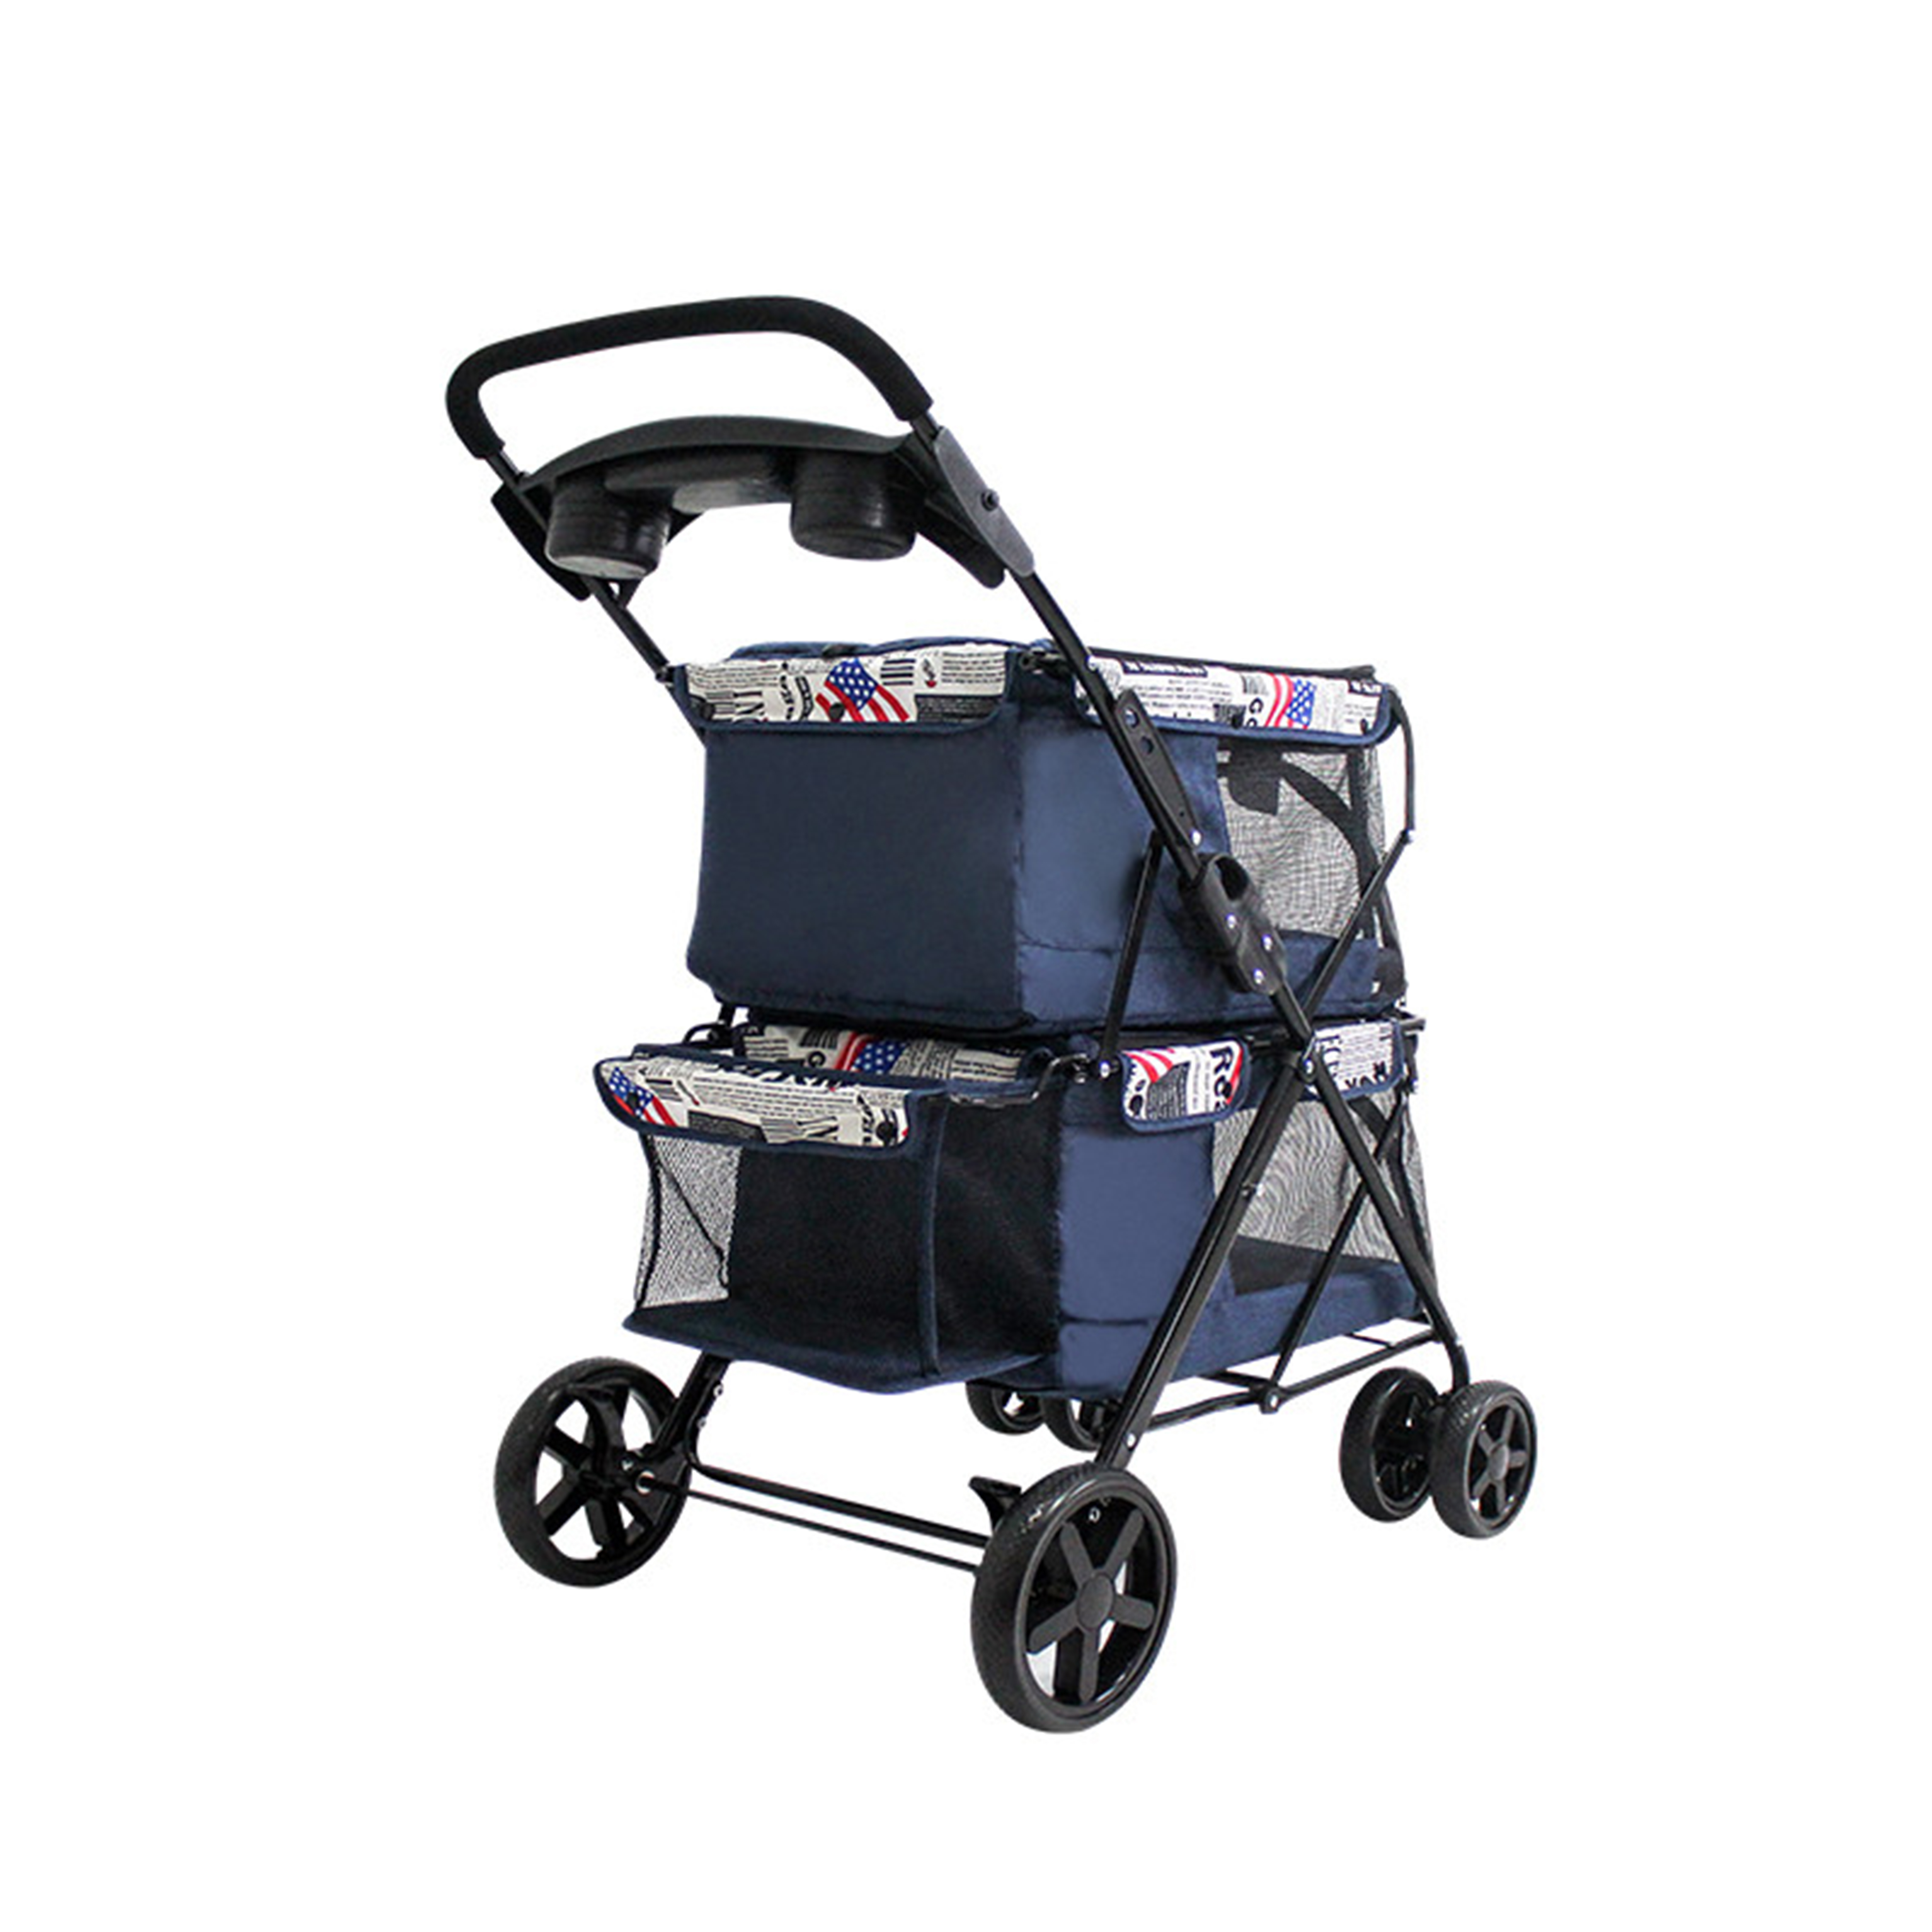 Shinee luxury pet stroller trolley factory manufacturer wholesale Featured Image